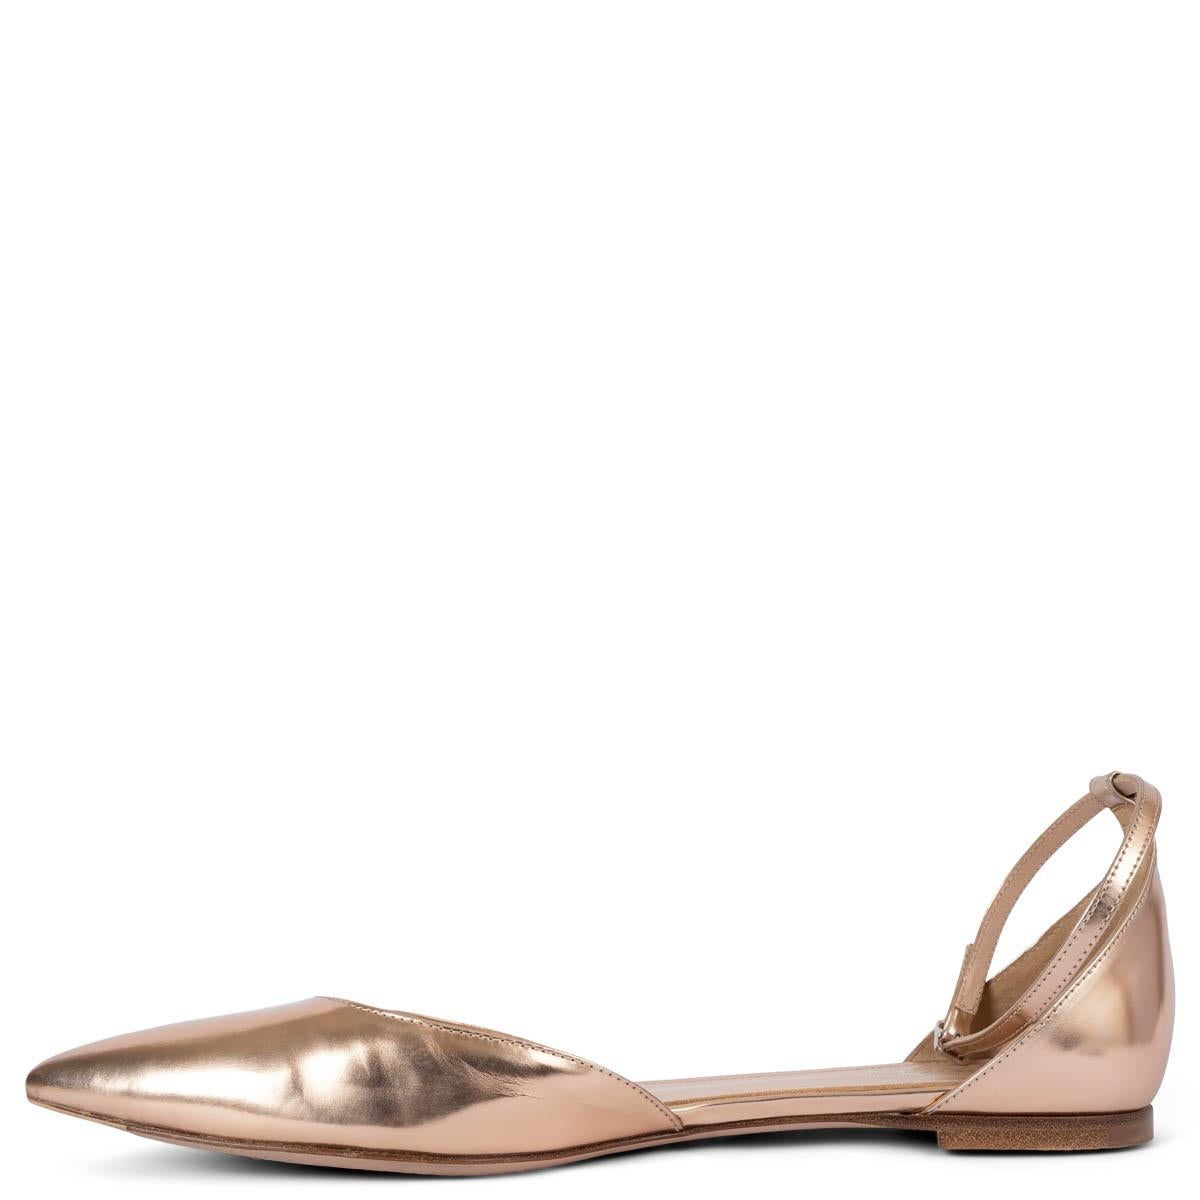 GIANVITO ROSSI rose gold leather GIA Ankle Strap Flats Shoes 39.5 In Fair Condition For Sale In Zürich, CH